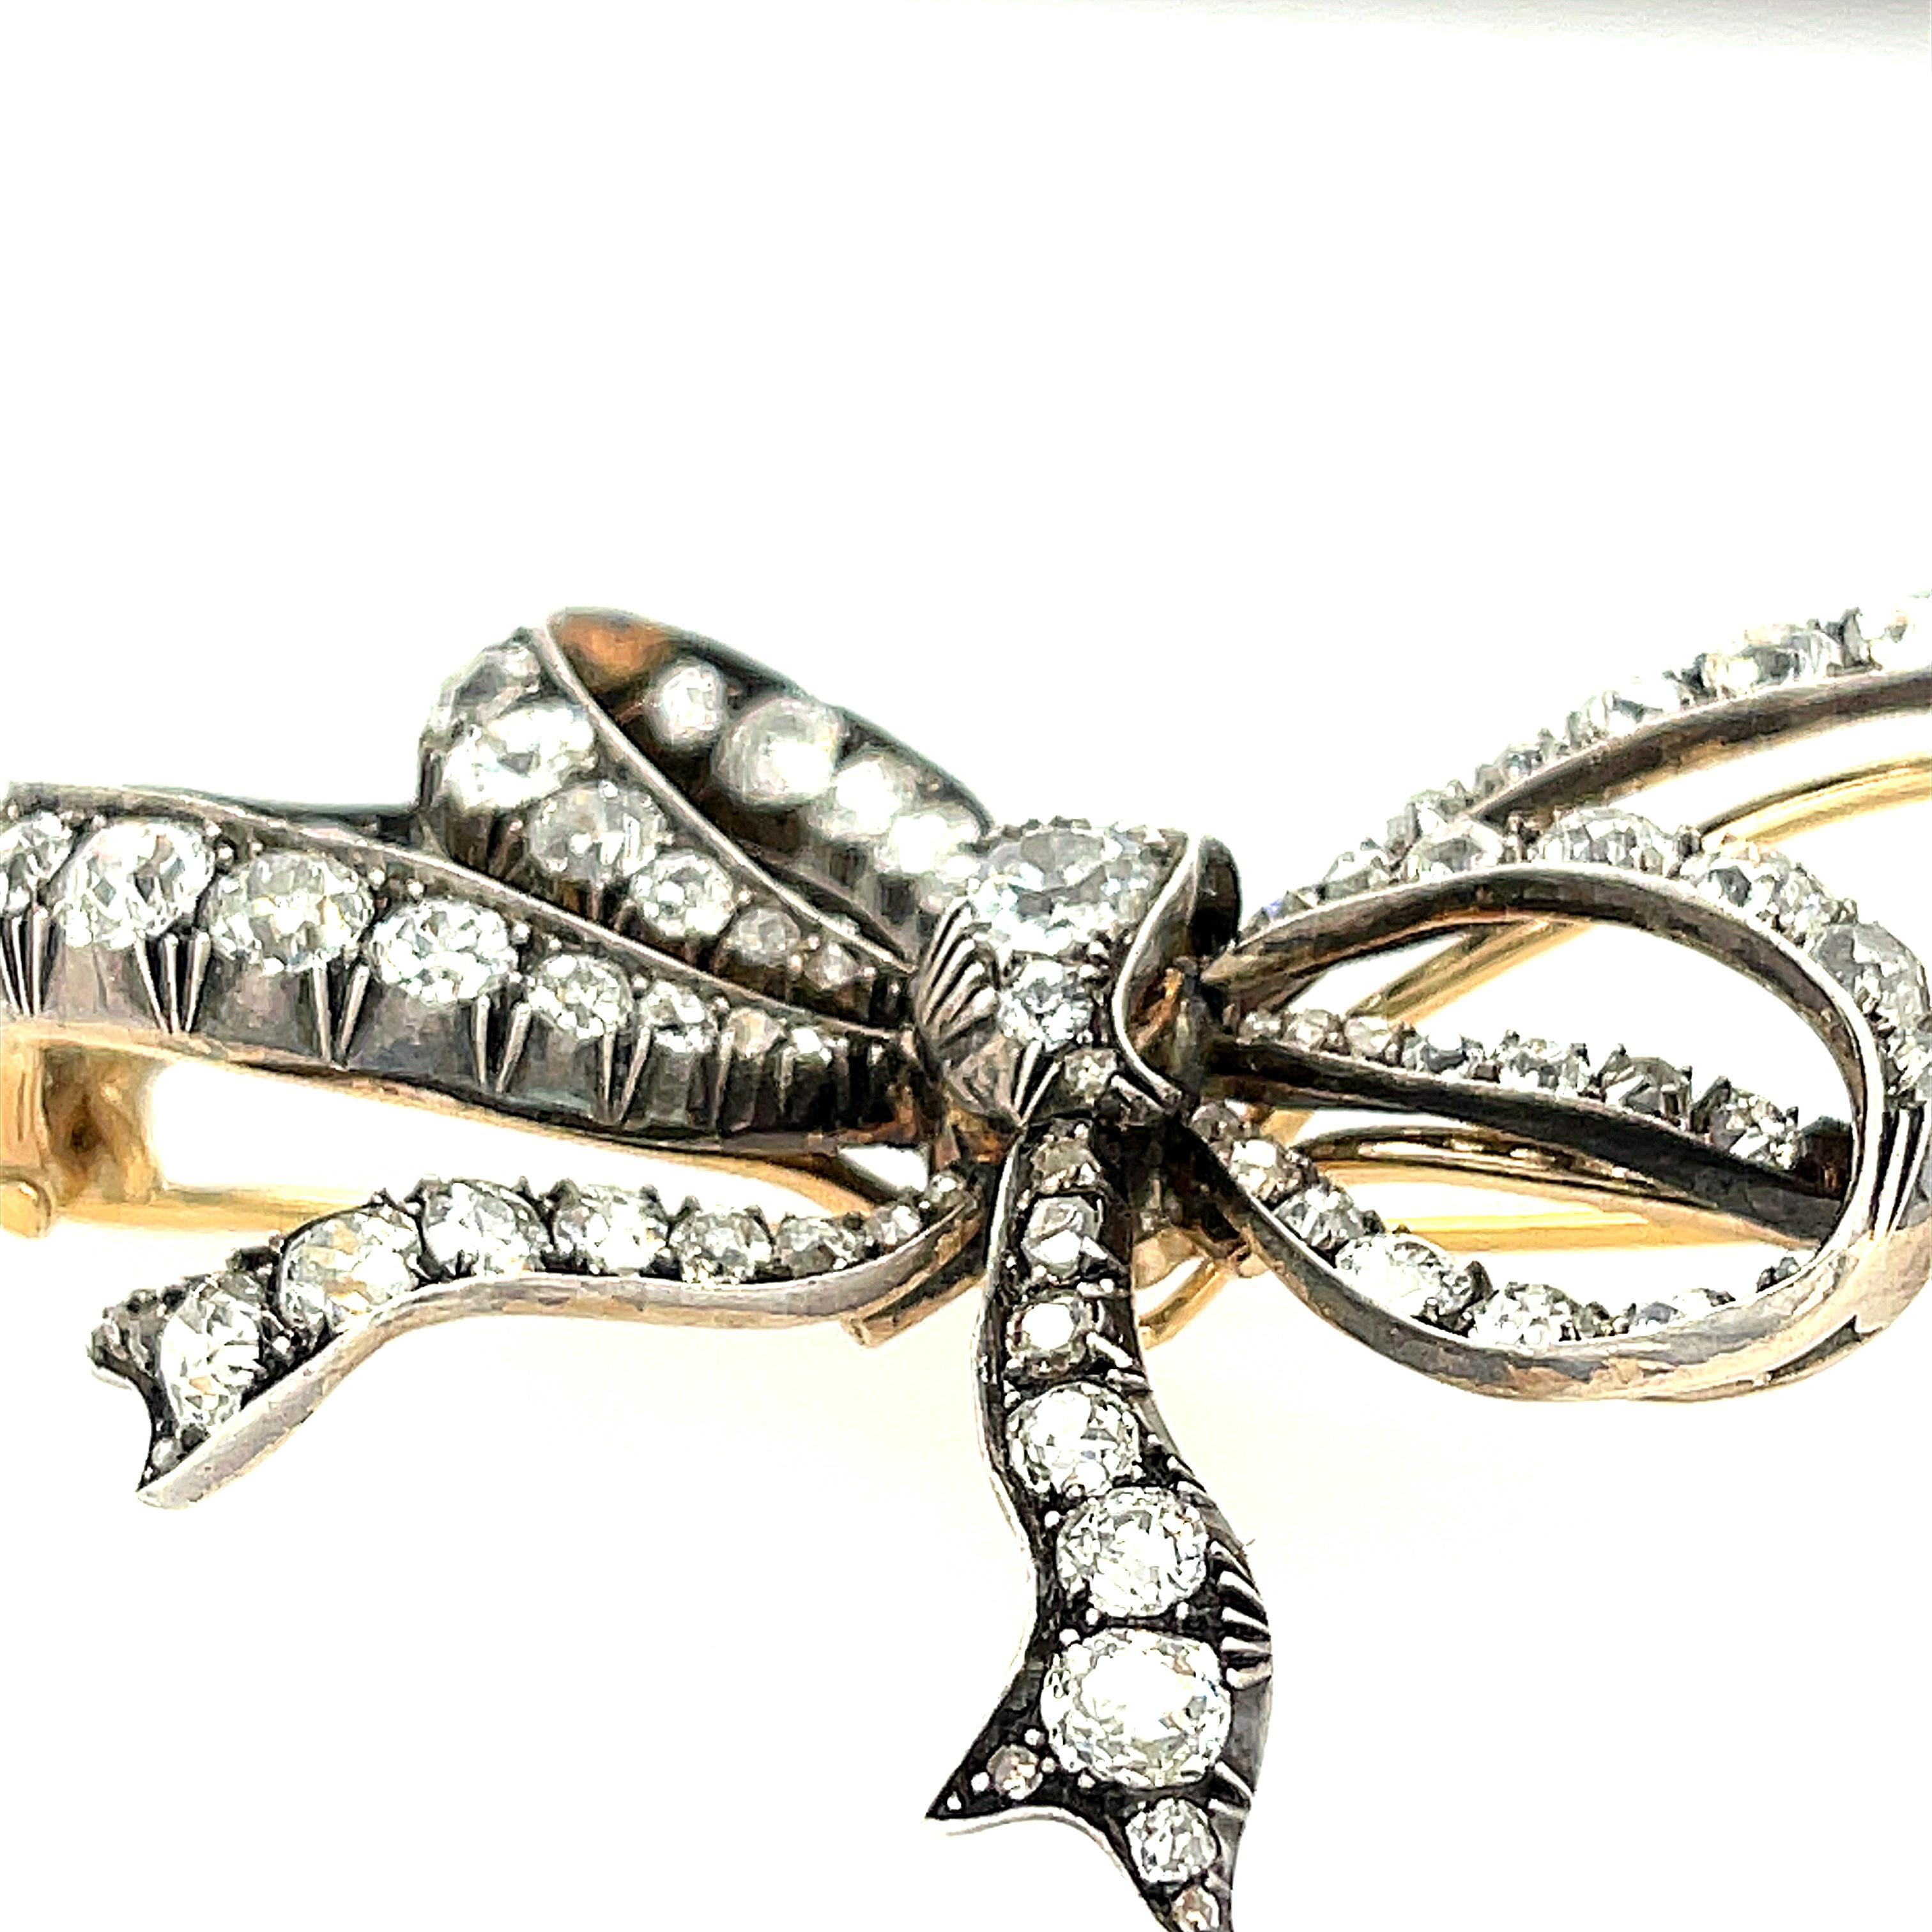 Antique late Victorian diamond and silver topped gold bow brooch, circa 1890. This brooch is wonderfully dimensional and feminine. It is set with 97 Old mine cut diamonds and some rose cut diamonds. There are about 5.50 carats total in the brooch.